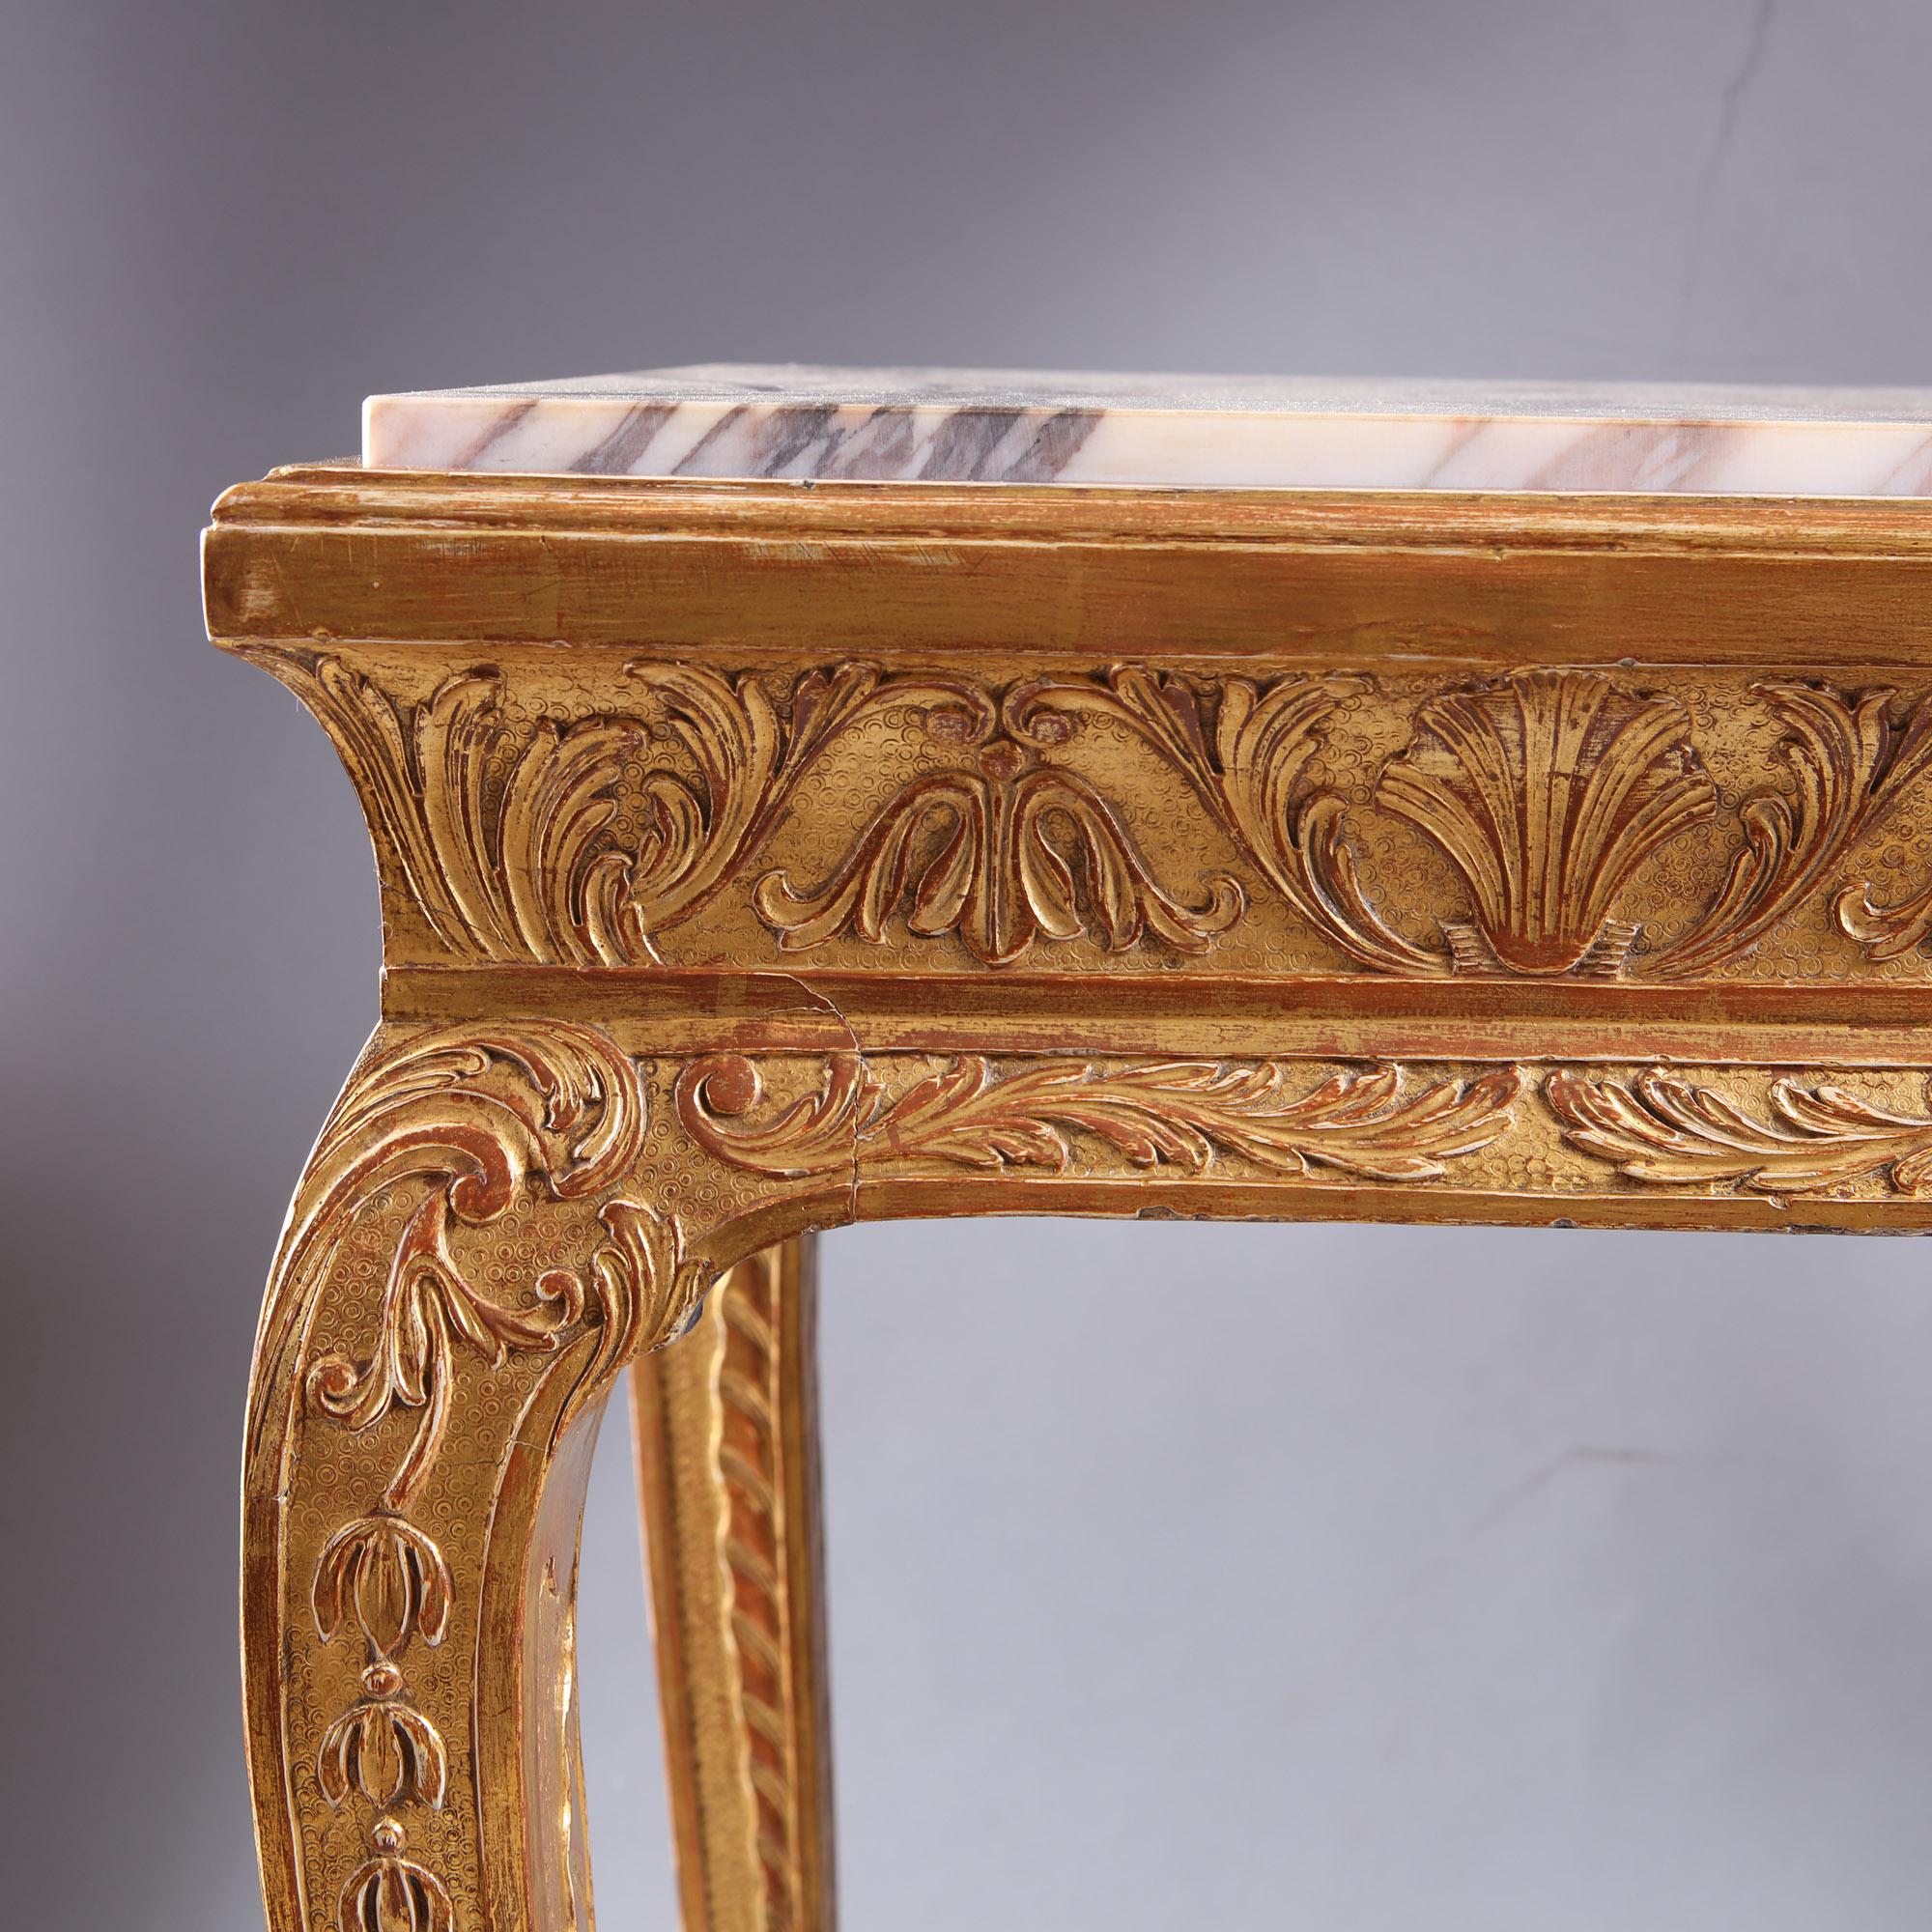 This 19th century carved gilt Gesso side table with marble top is a stunning piece of furniture in the early 18th century style. It features a beautiful marble top, with intricate carvings and gilt gesso accents. The table is made from high-quality